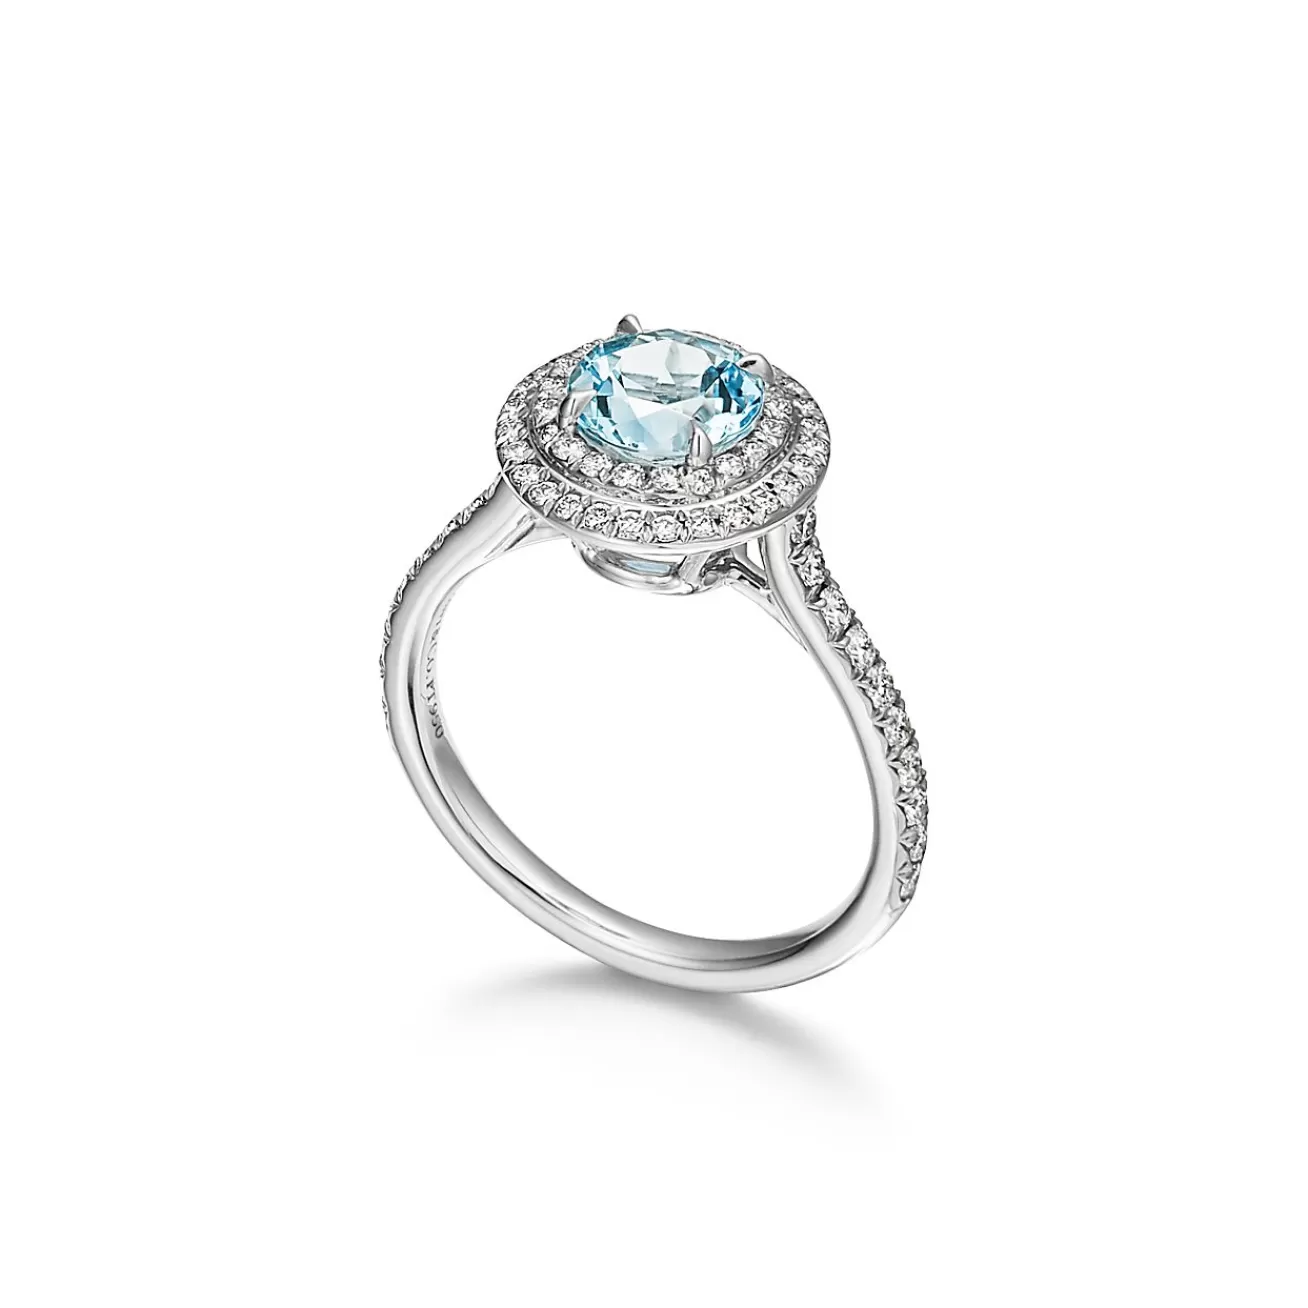 Tiffany & Co. Tiffany Soleste® ring in platinum with a .70-carat aquamarine and diamonds. | ^ Rings | Gifts for Her